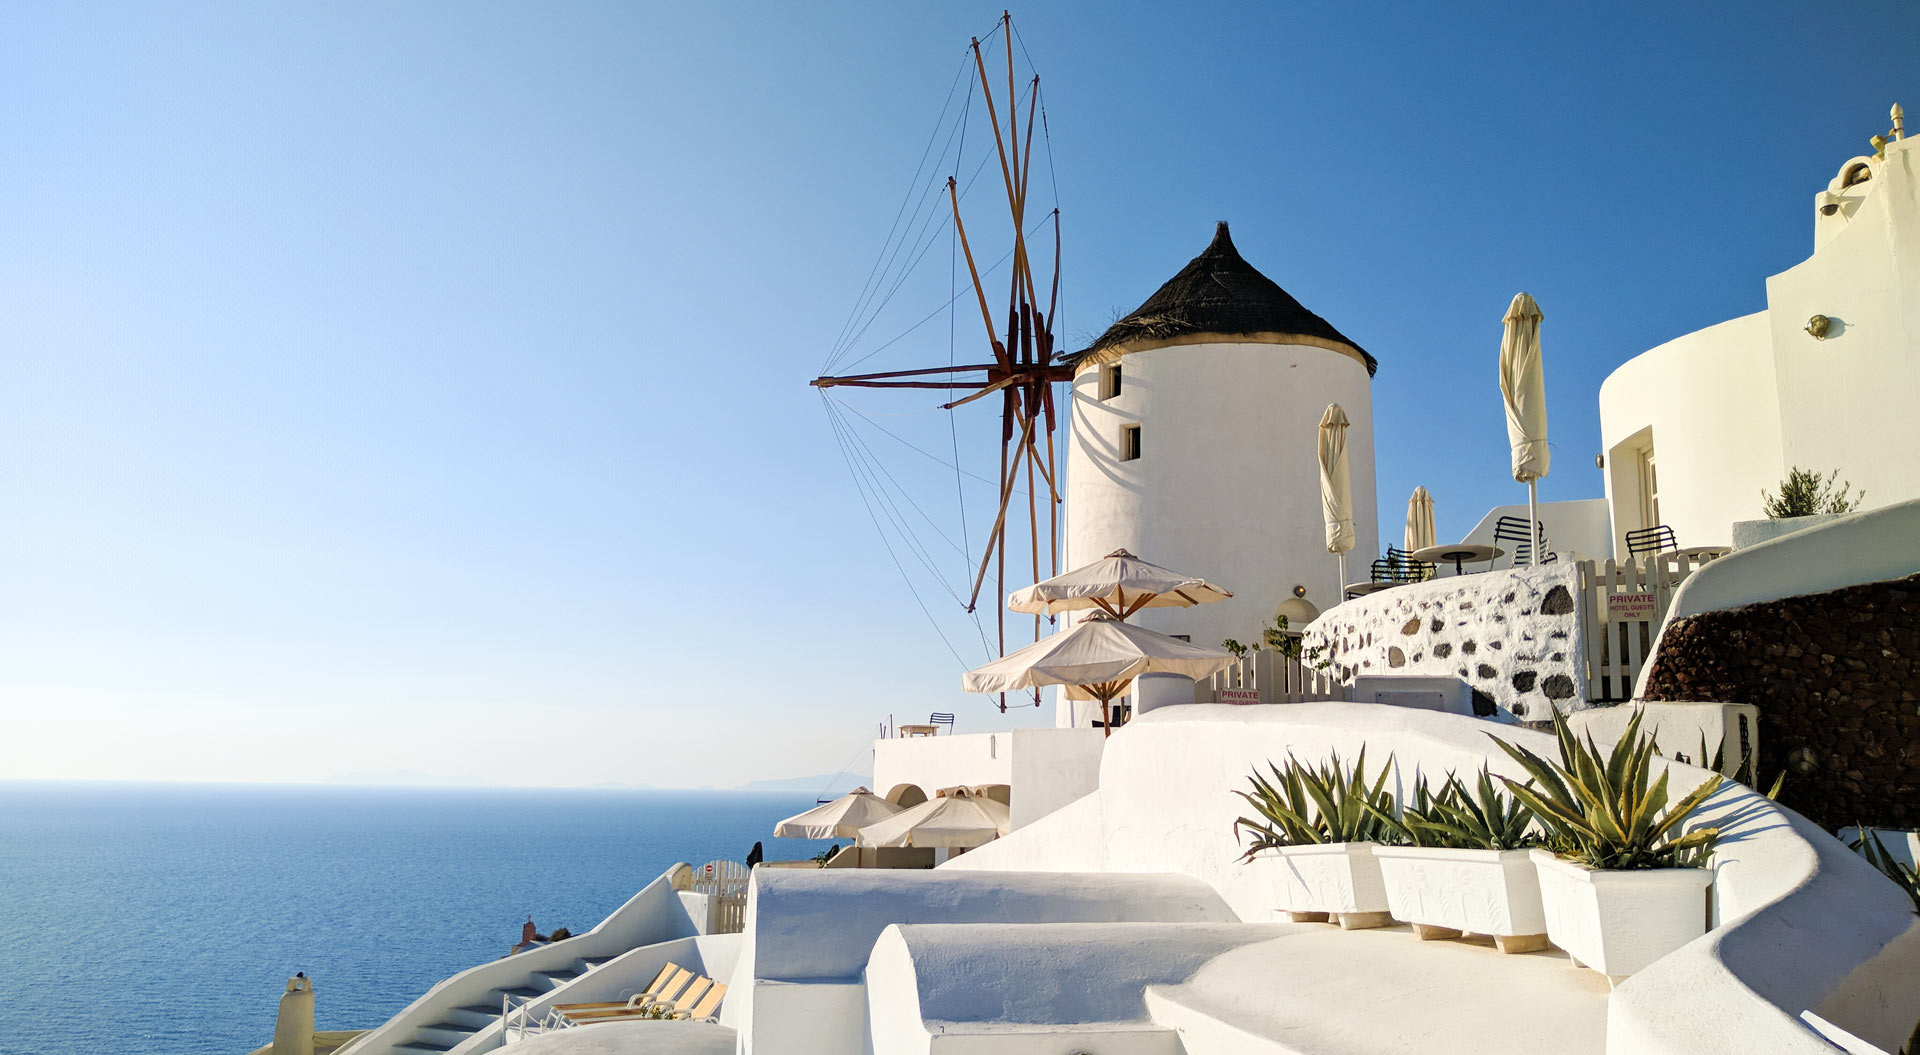 Visit Santorini: Top 17 Things To Do and Must-See Attractions